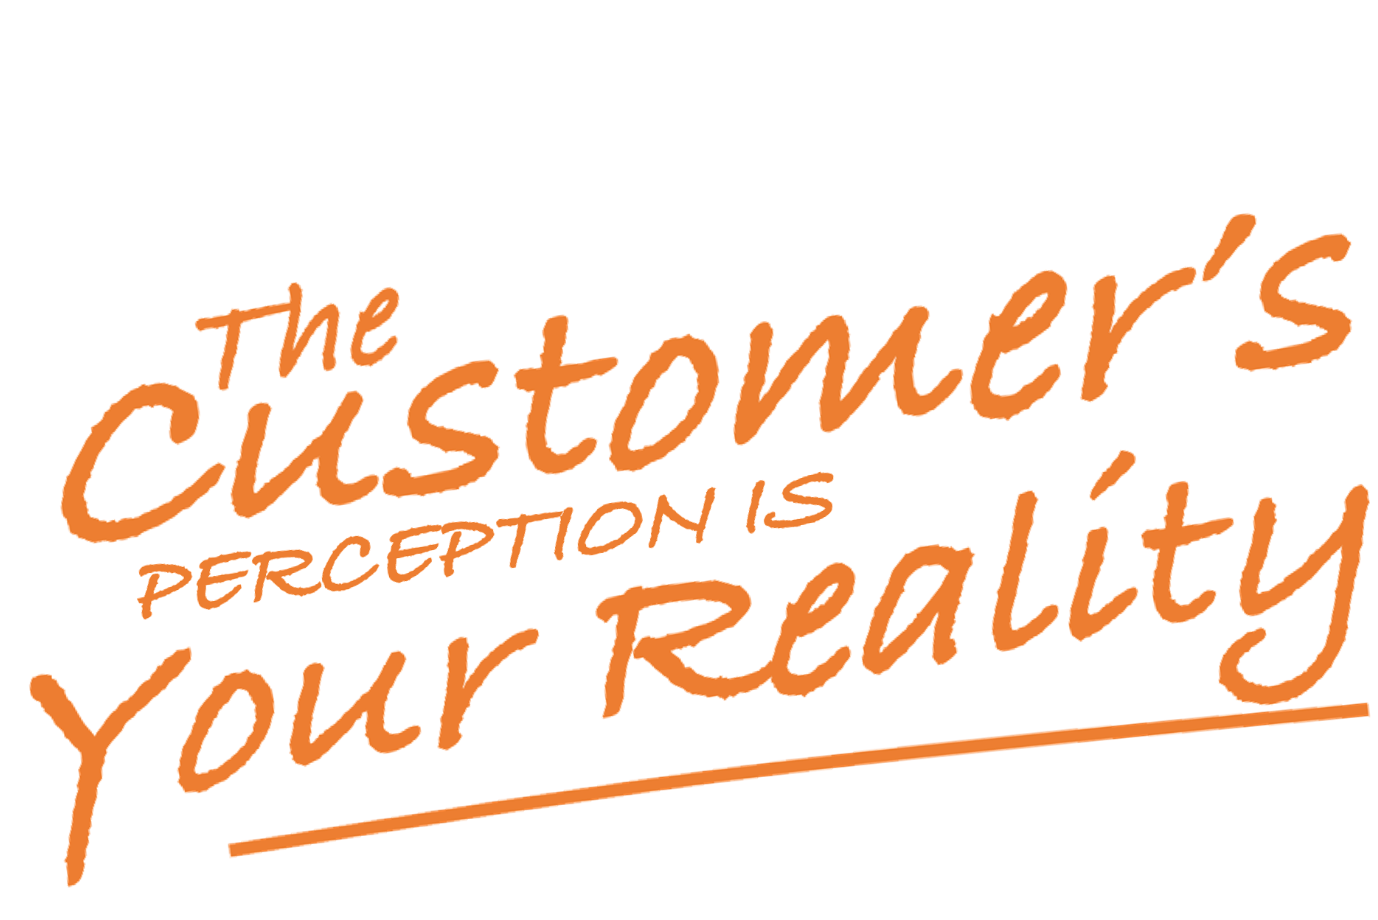 The customer's perception is your reality